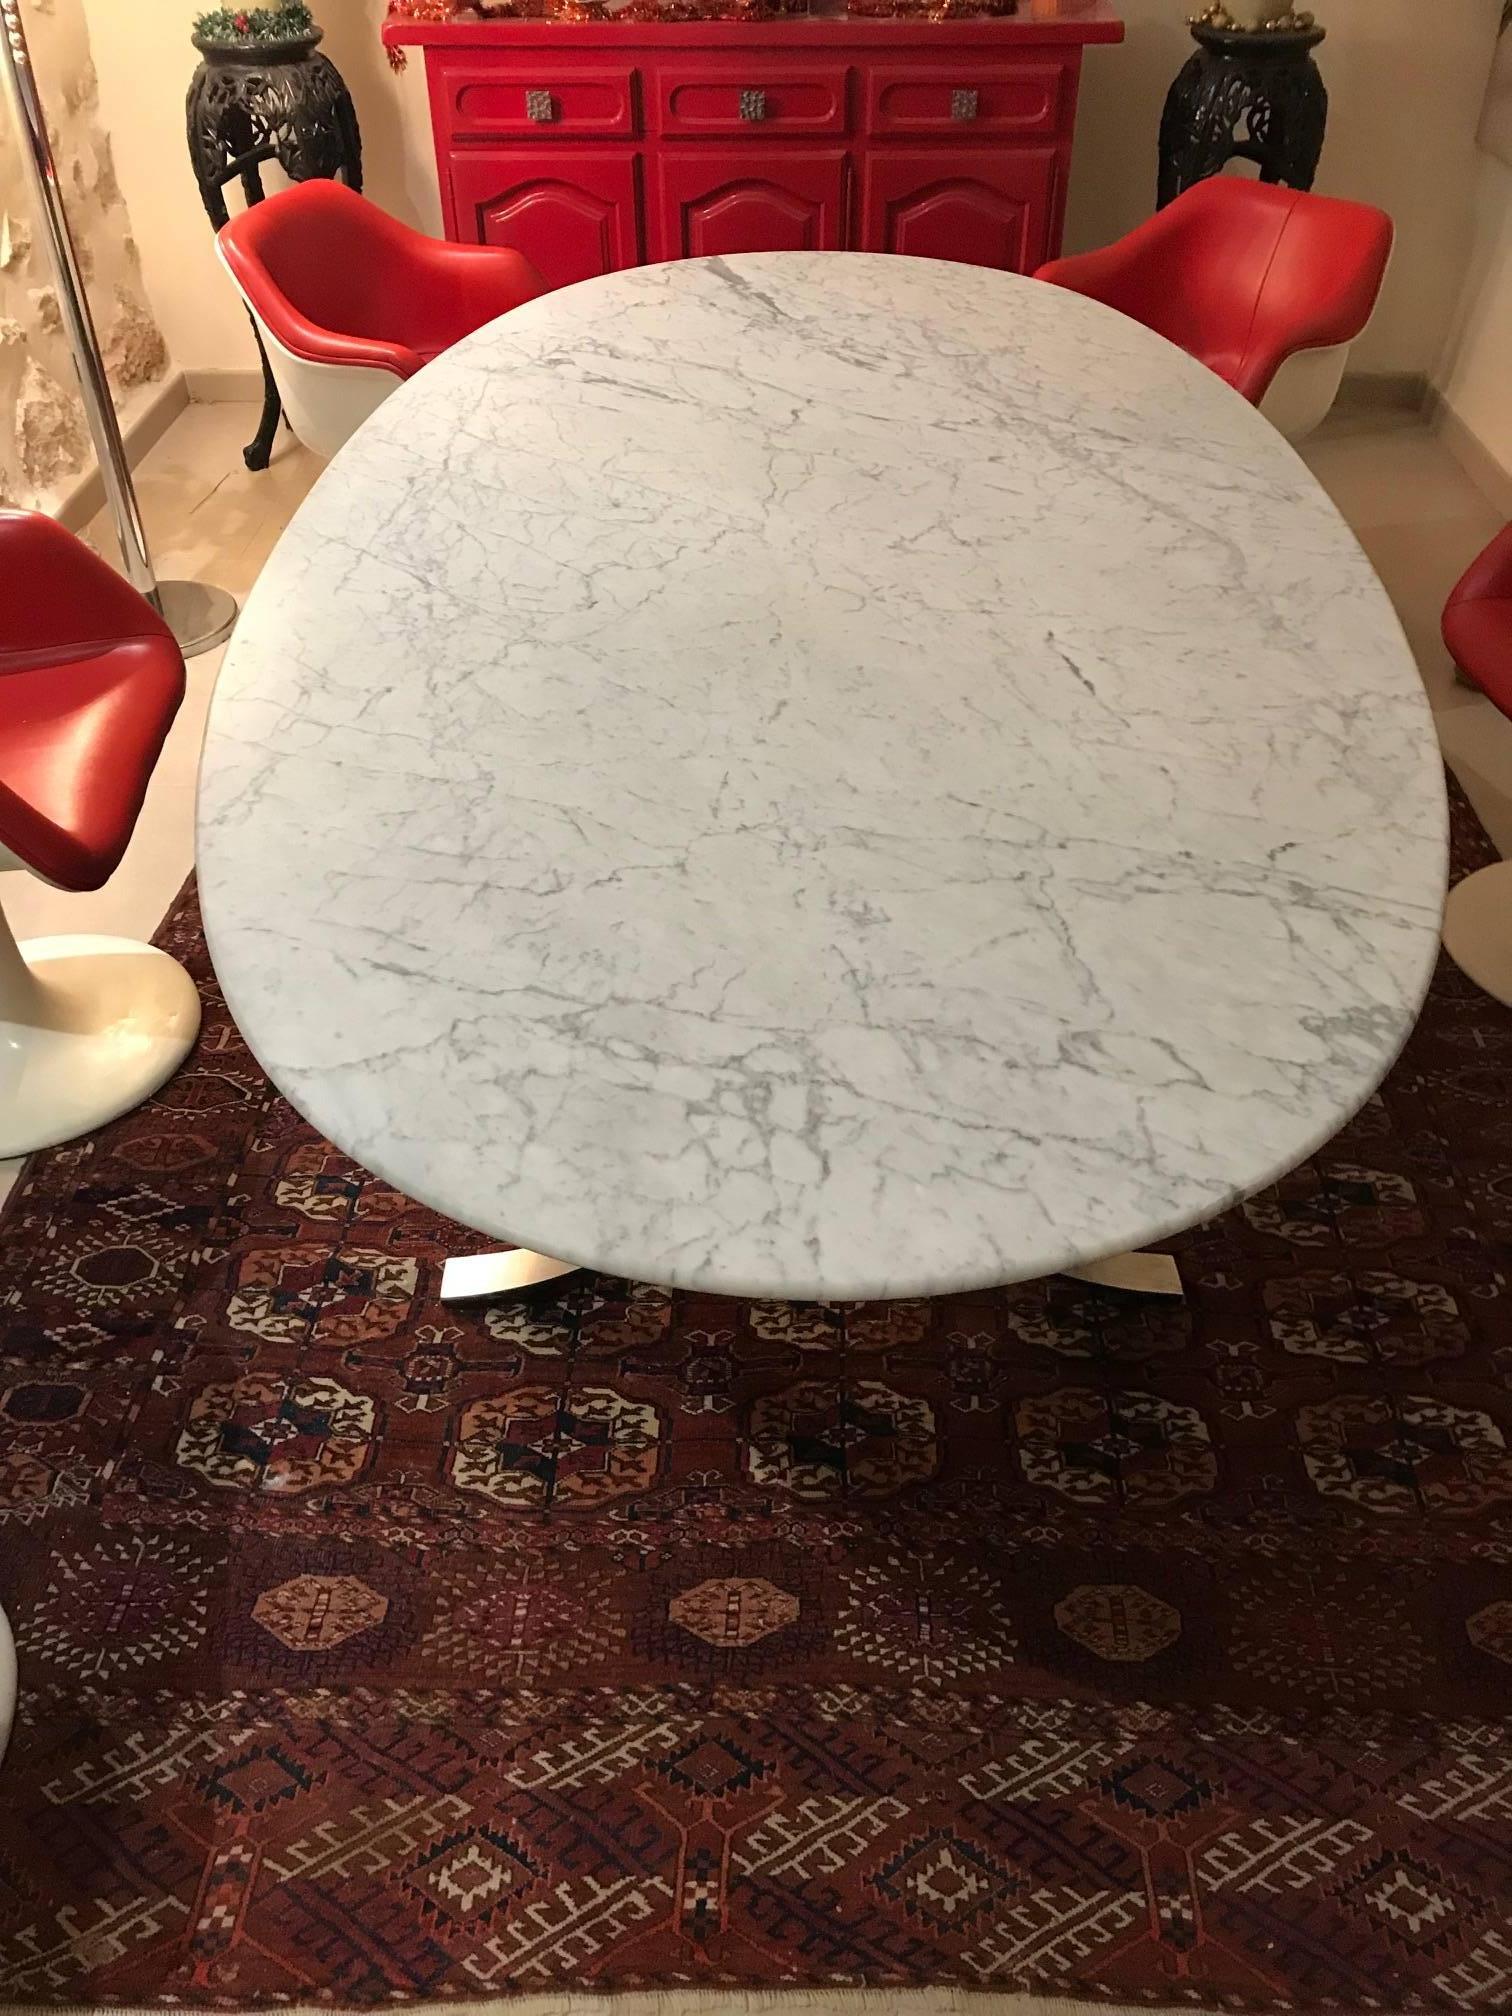 Osvaldo Borsani large dining table with original marble top, Tecno, 1960s.
Tabletop made of Carrara marble 230 cm with a tulip steel base.